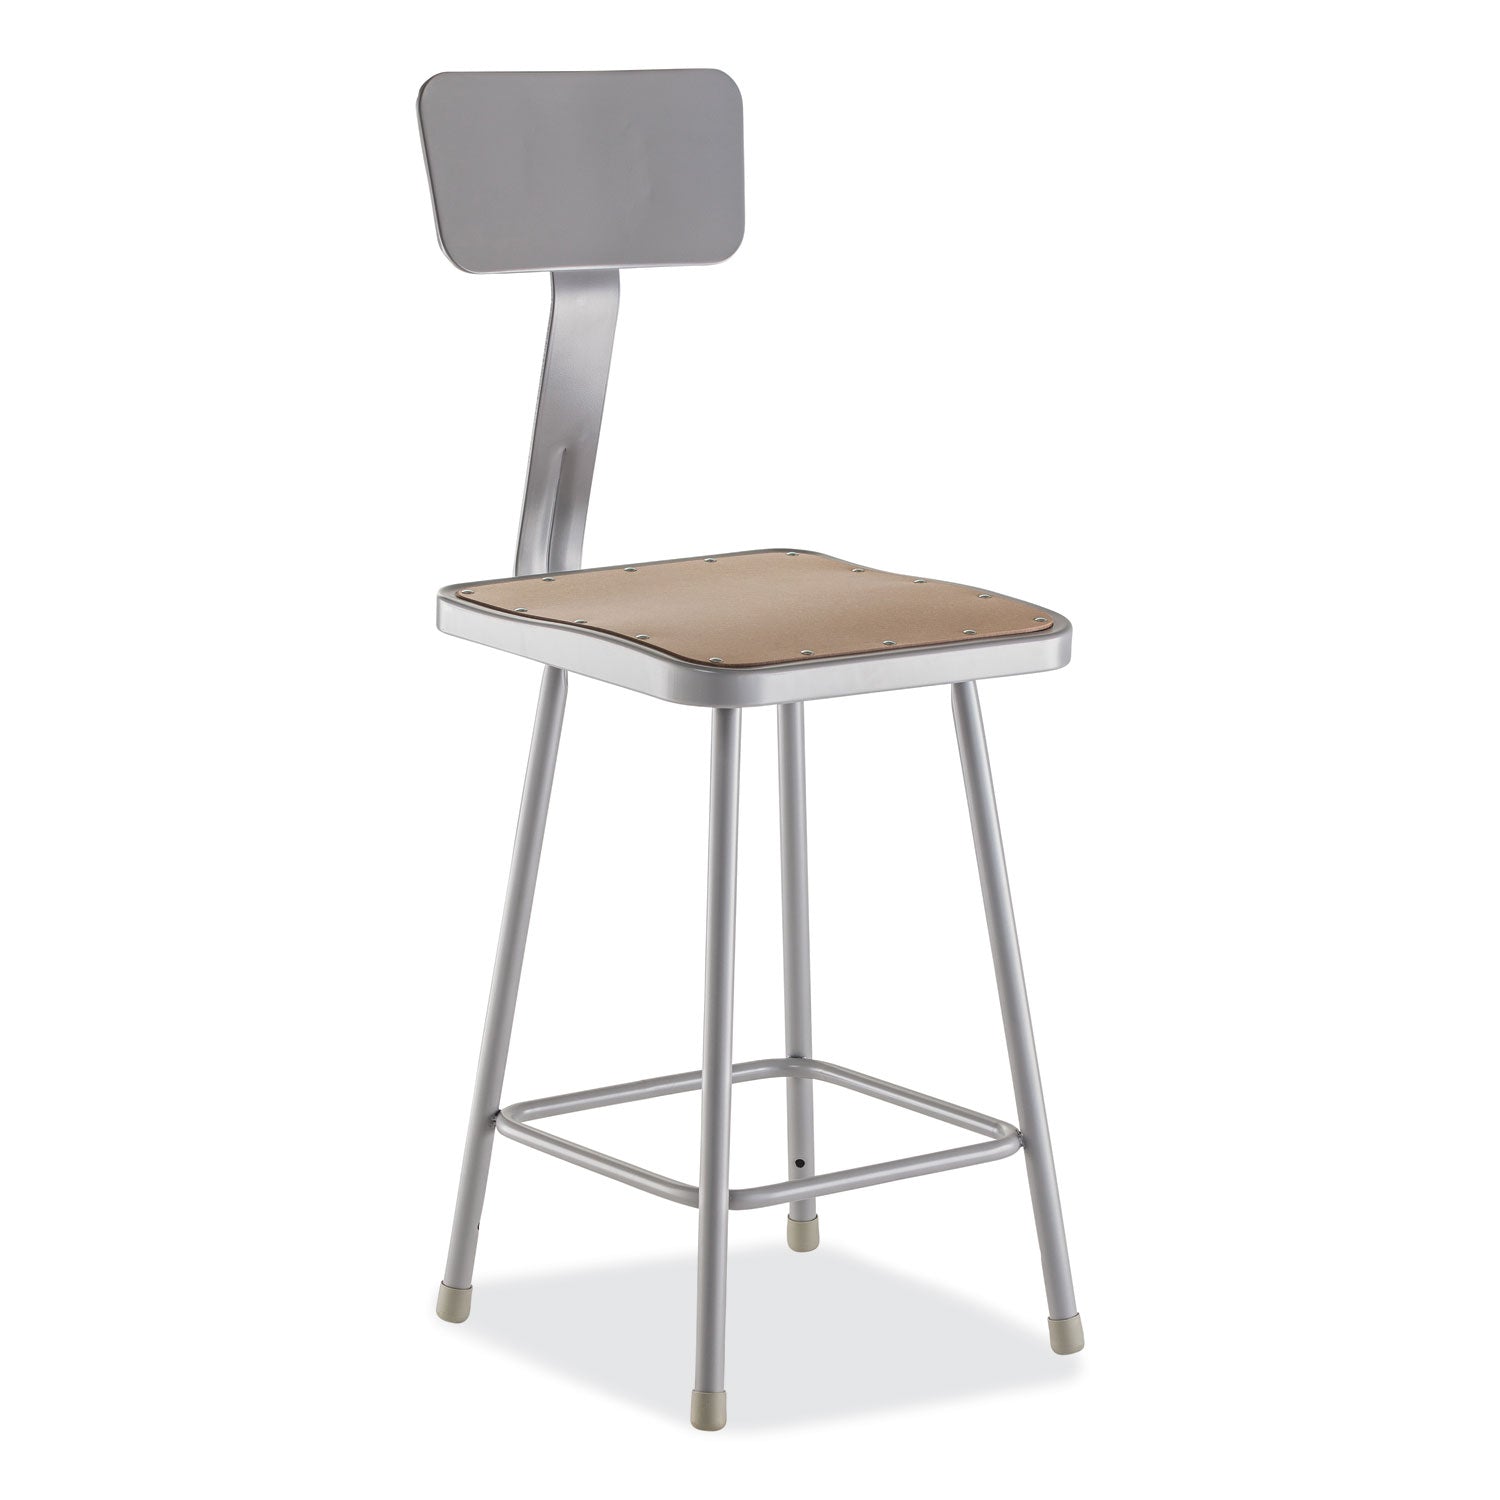 6300-series-hd-square-seat-stool-w-backrest-supports-500-lb-2325-seat-ht-brown-seatgray-back-baseships-in-1-3-bus-days_nps6324b - 1